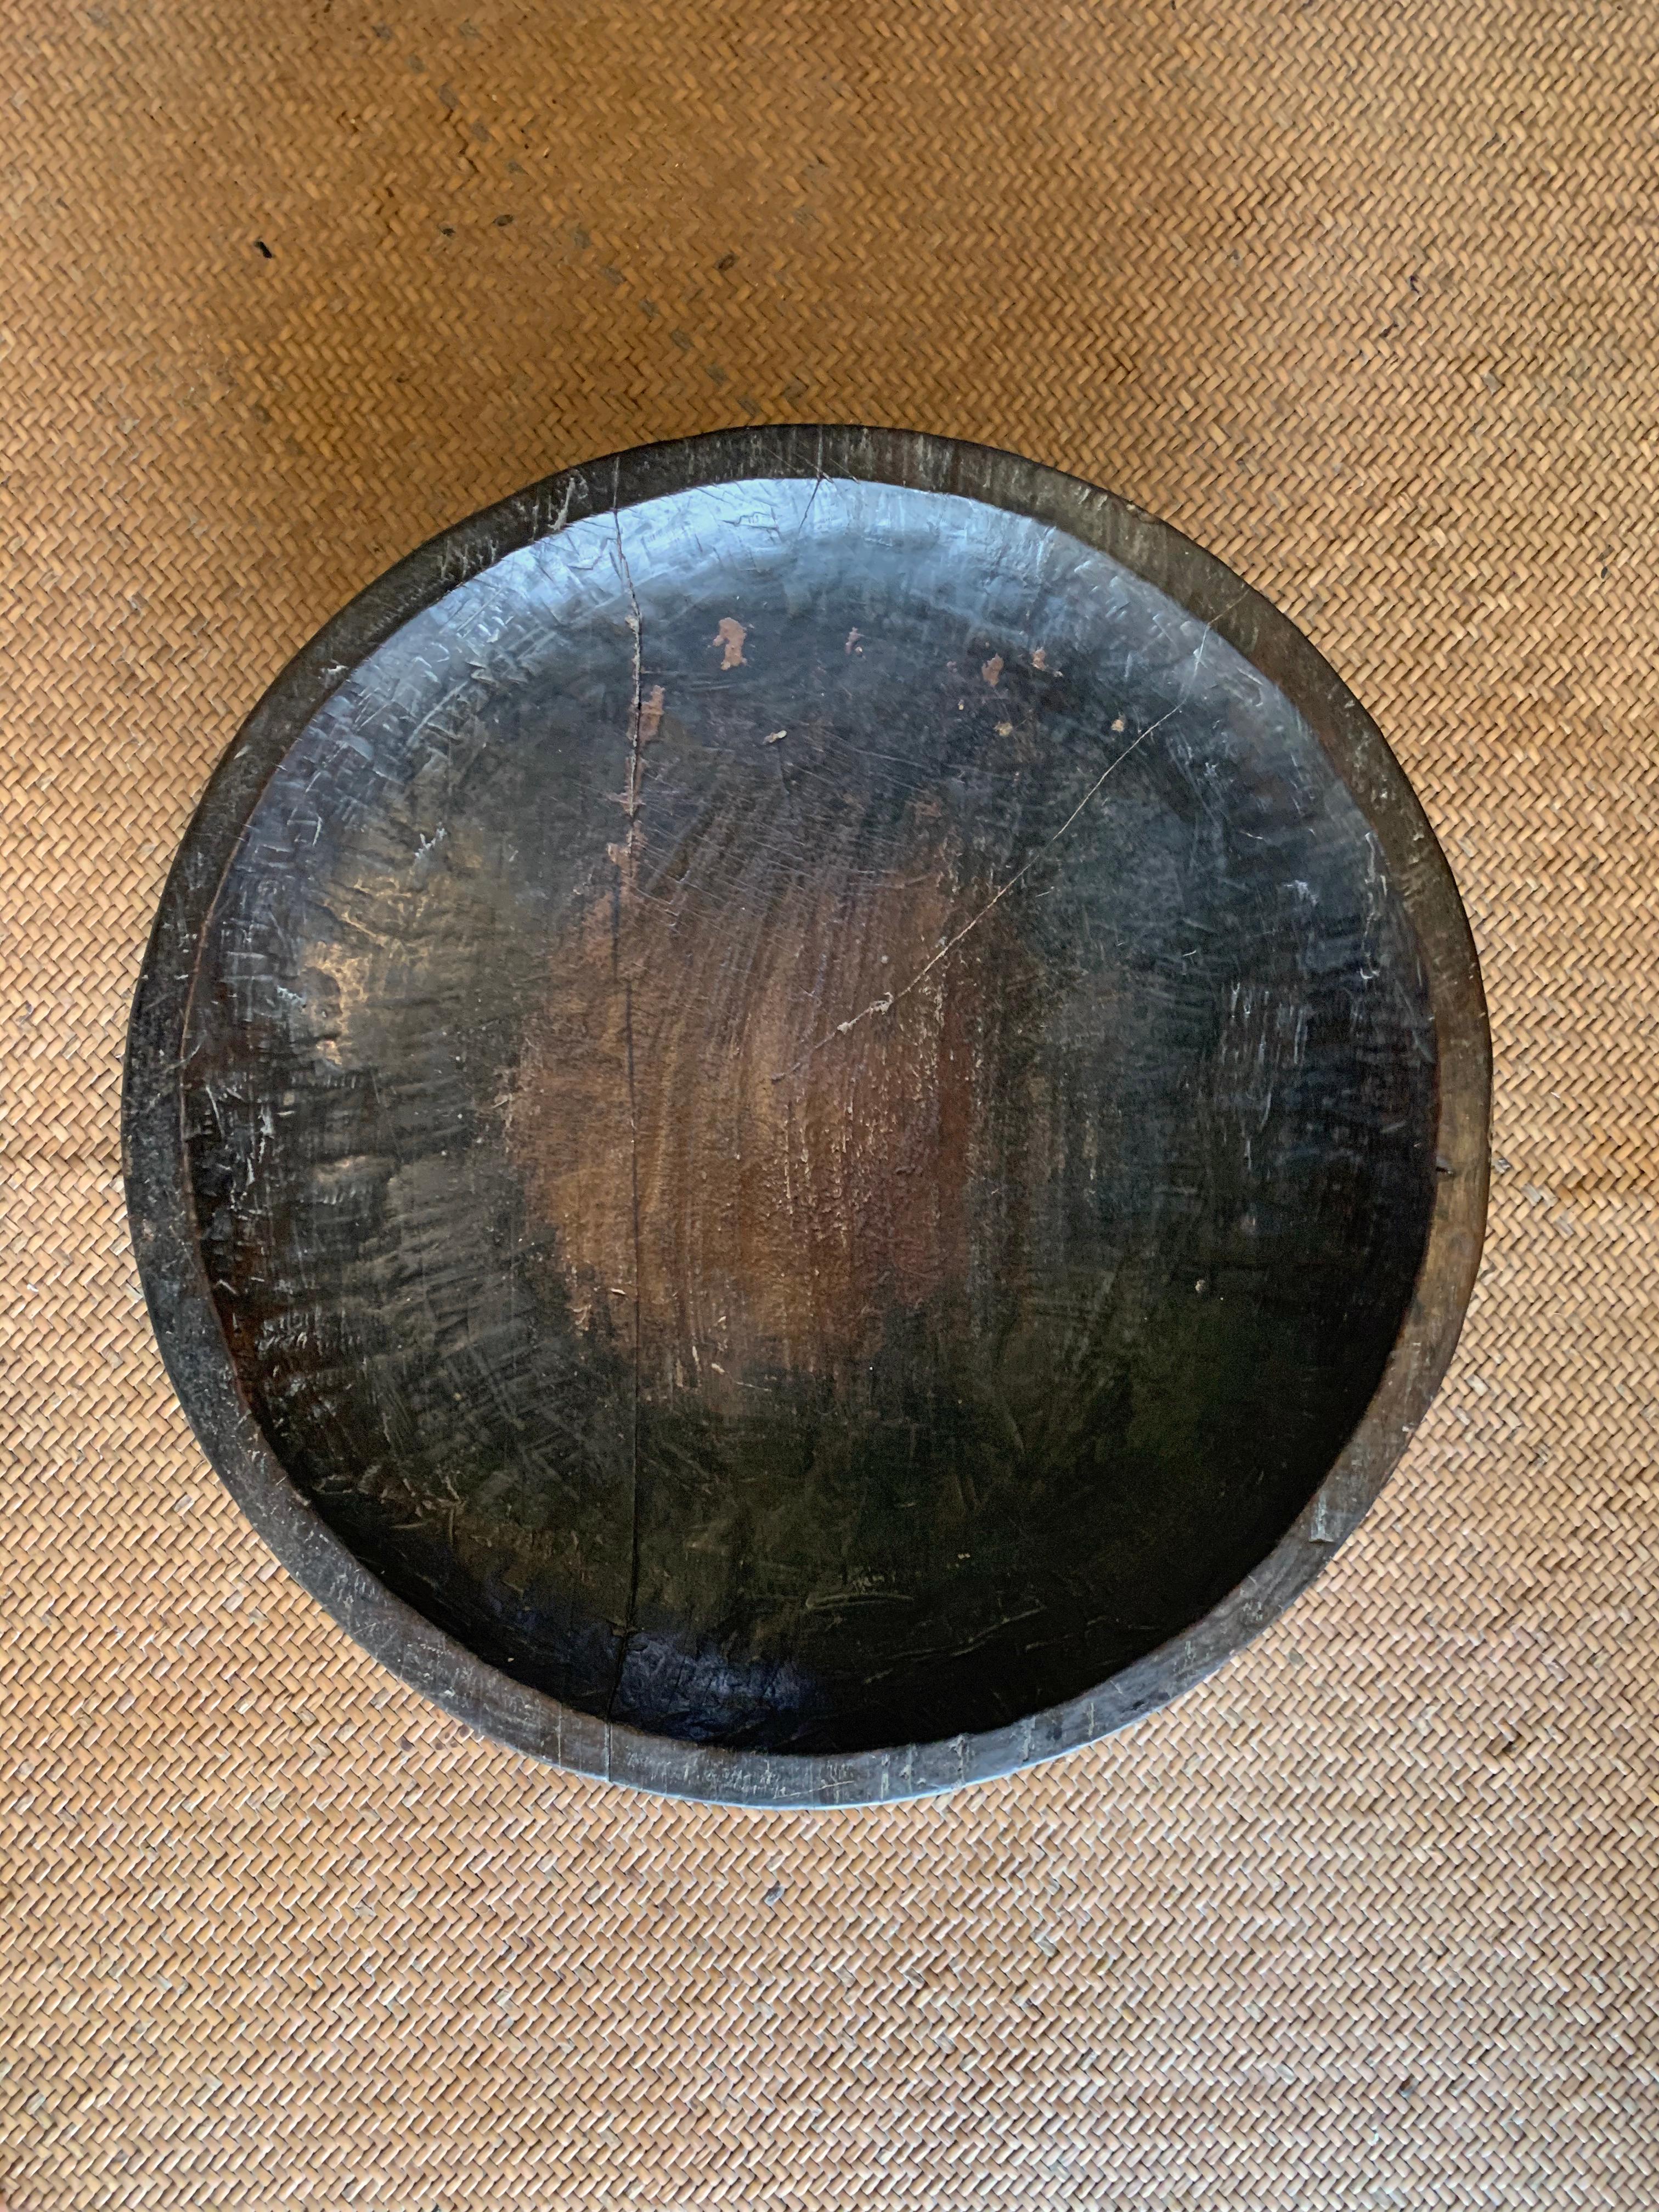 Other Batak Tribe Ceremonial Bowl from Jackfruit Wood, Early 20th Century